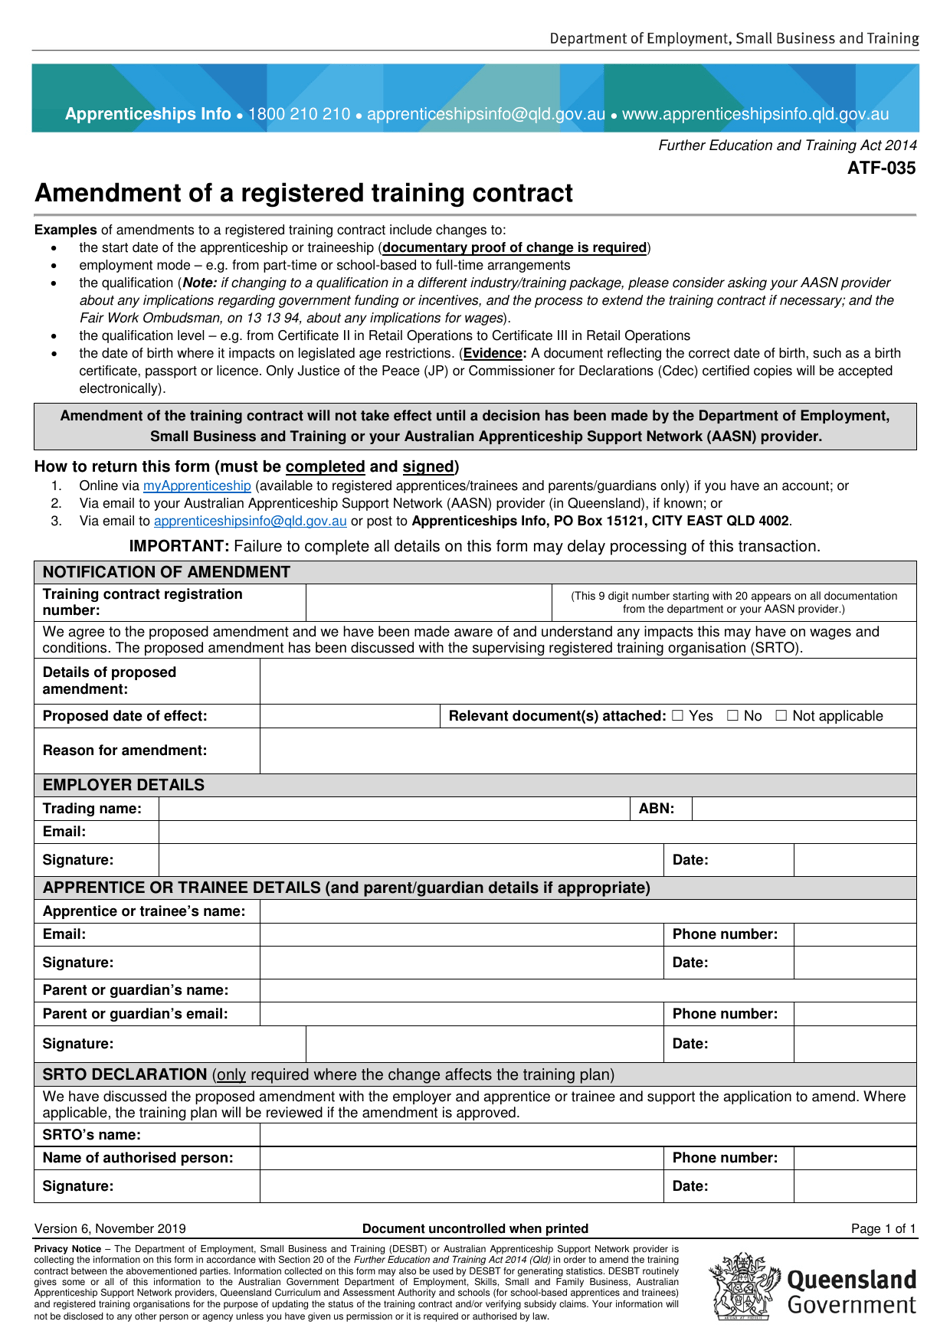 Form ATF-035 Amendment of a Registered Training Contract - Queensland, Australia, Page 1